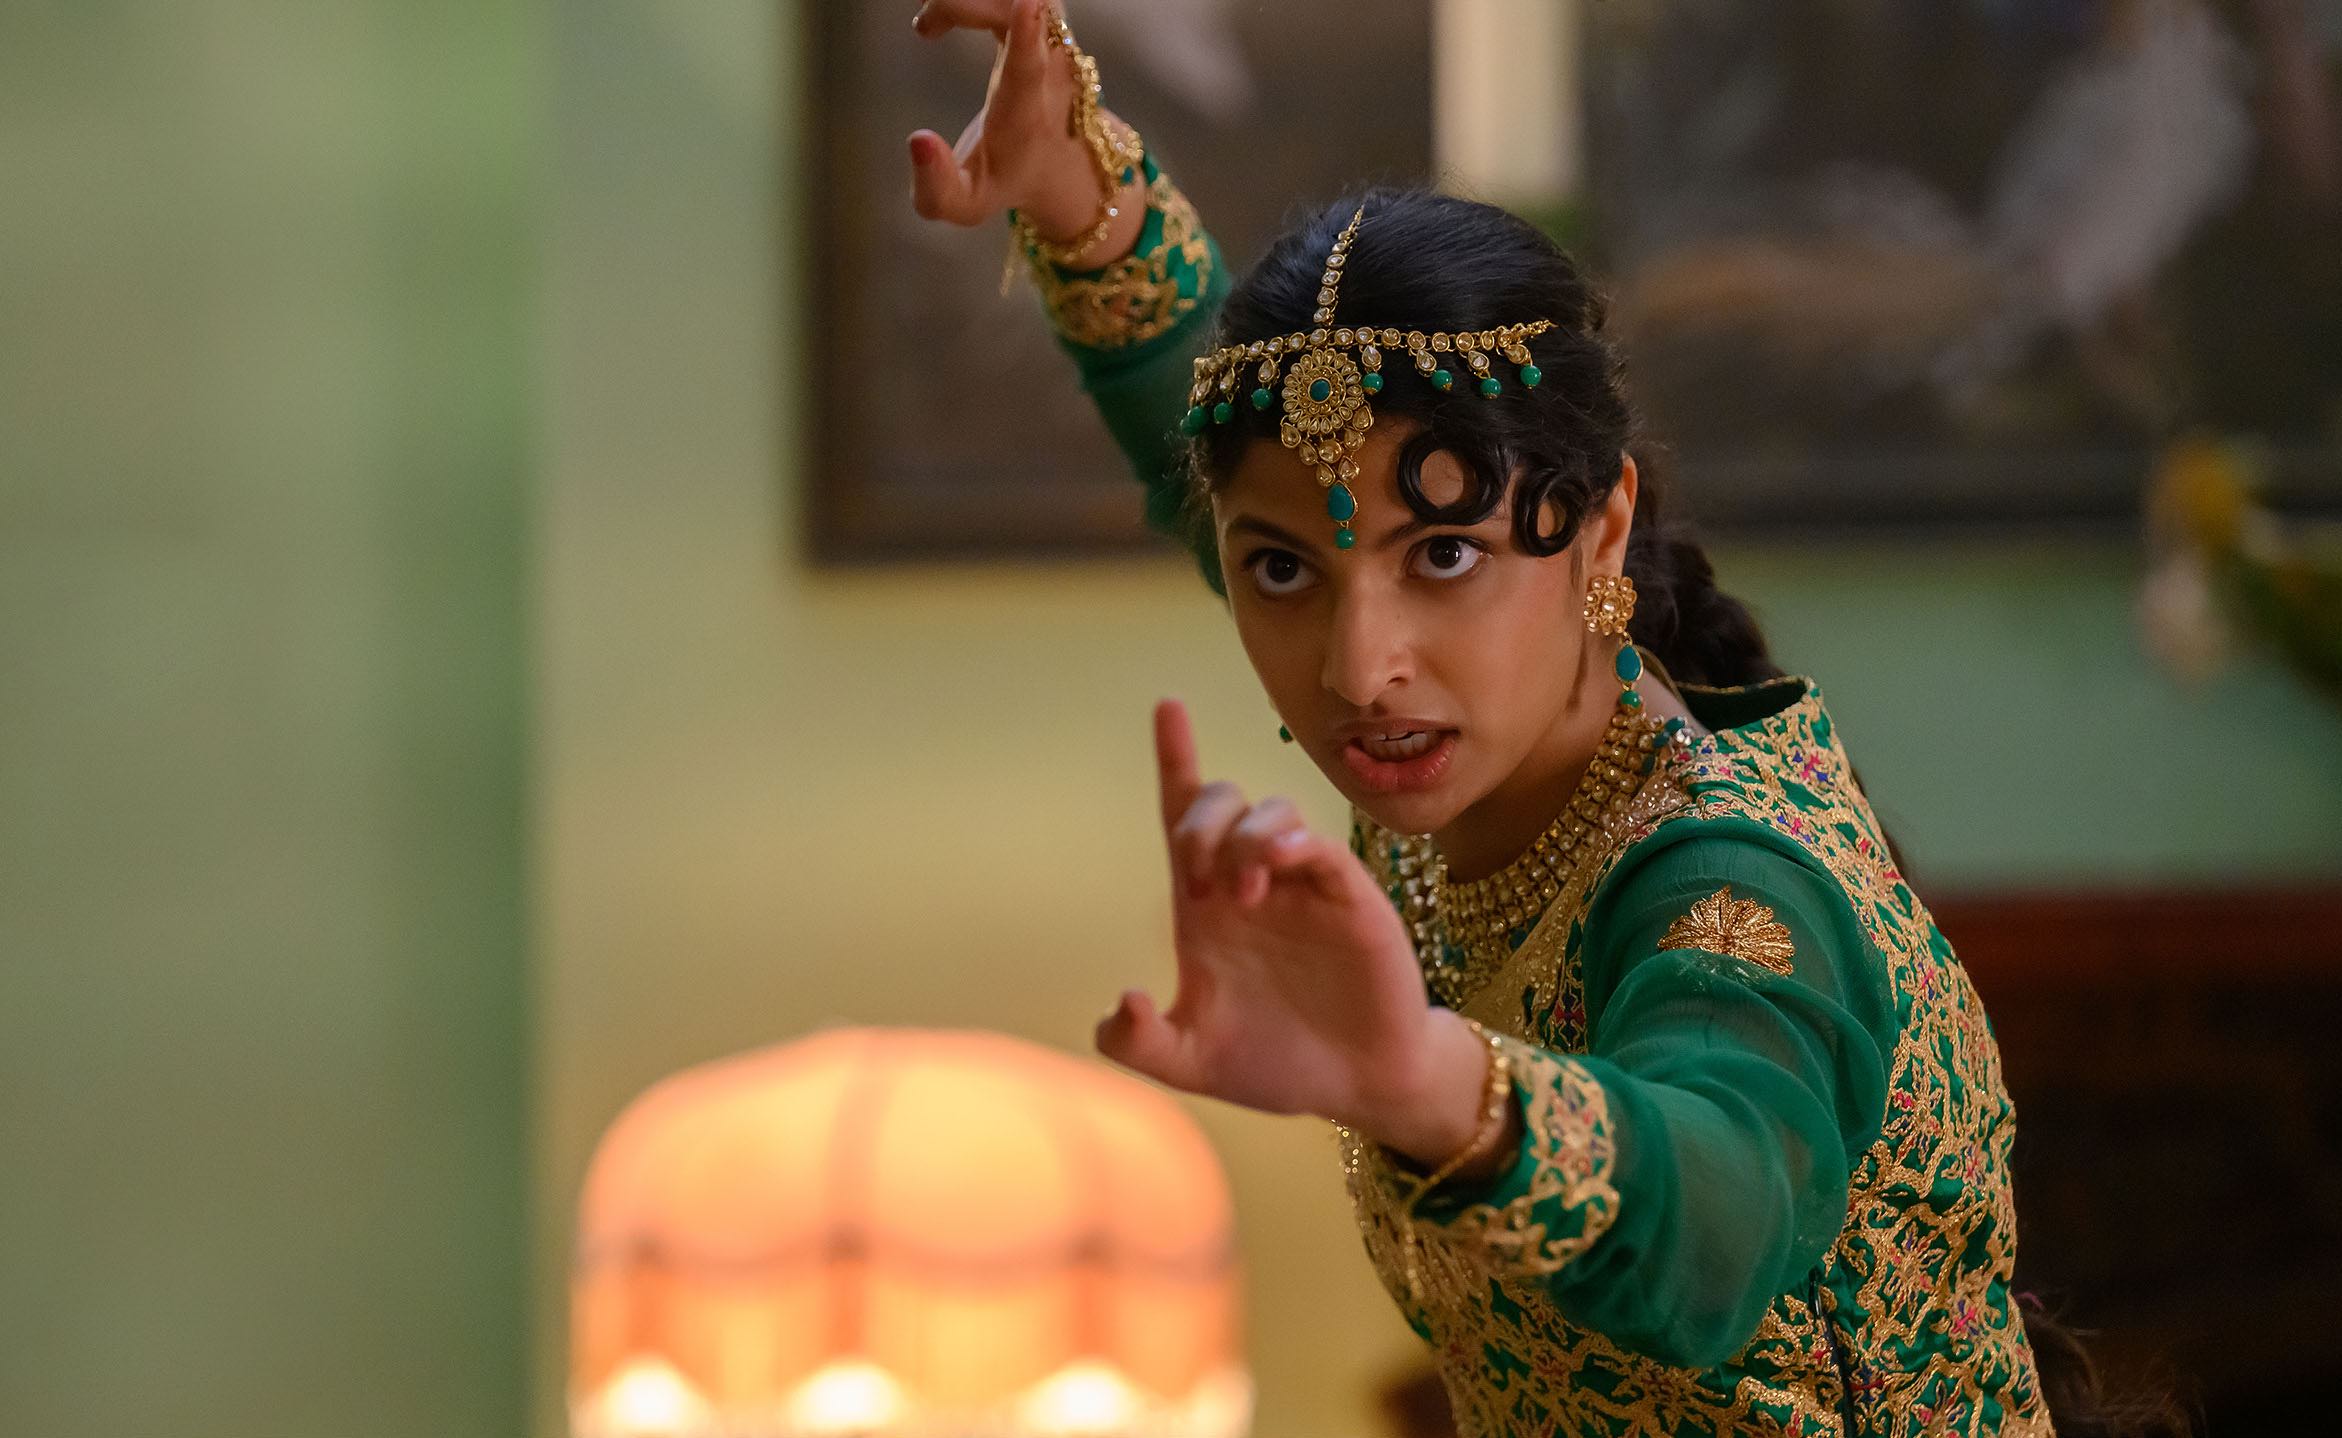 Priya Kansara treats wedding jitters with kick-ass action in Polite Society / Photo by Parisa Taghizadeh, courtesy of Sundance Institute